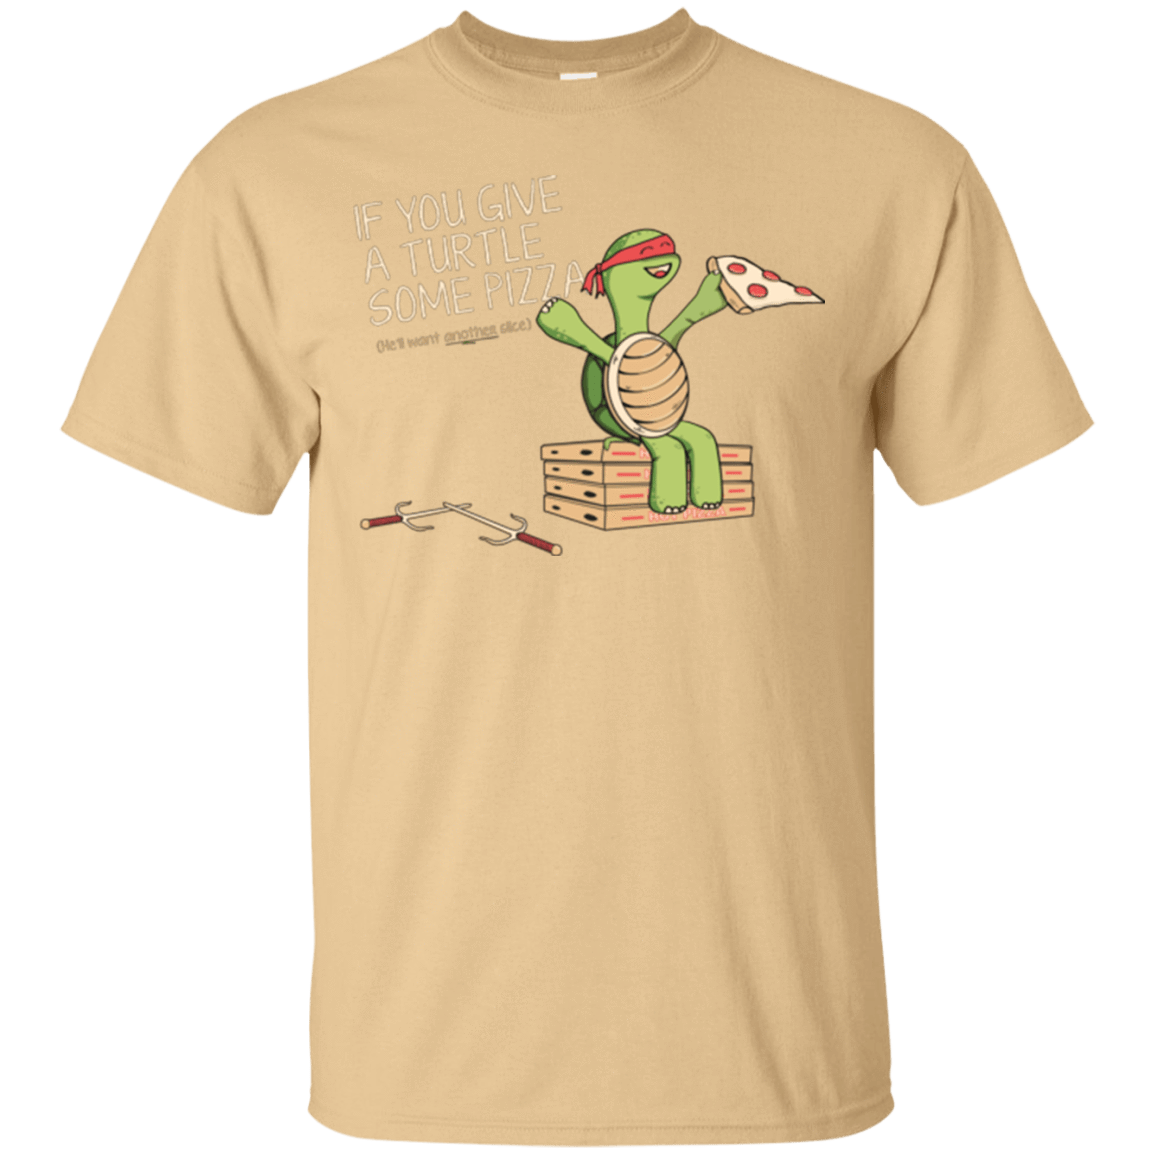 T-Shirts Vegas Gold / Small Give a Turtle T-Shirt